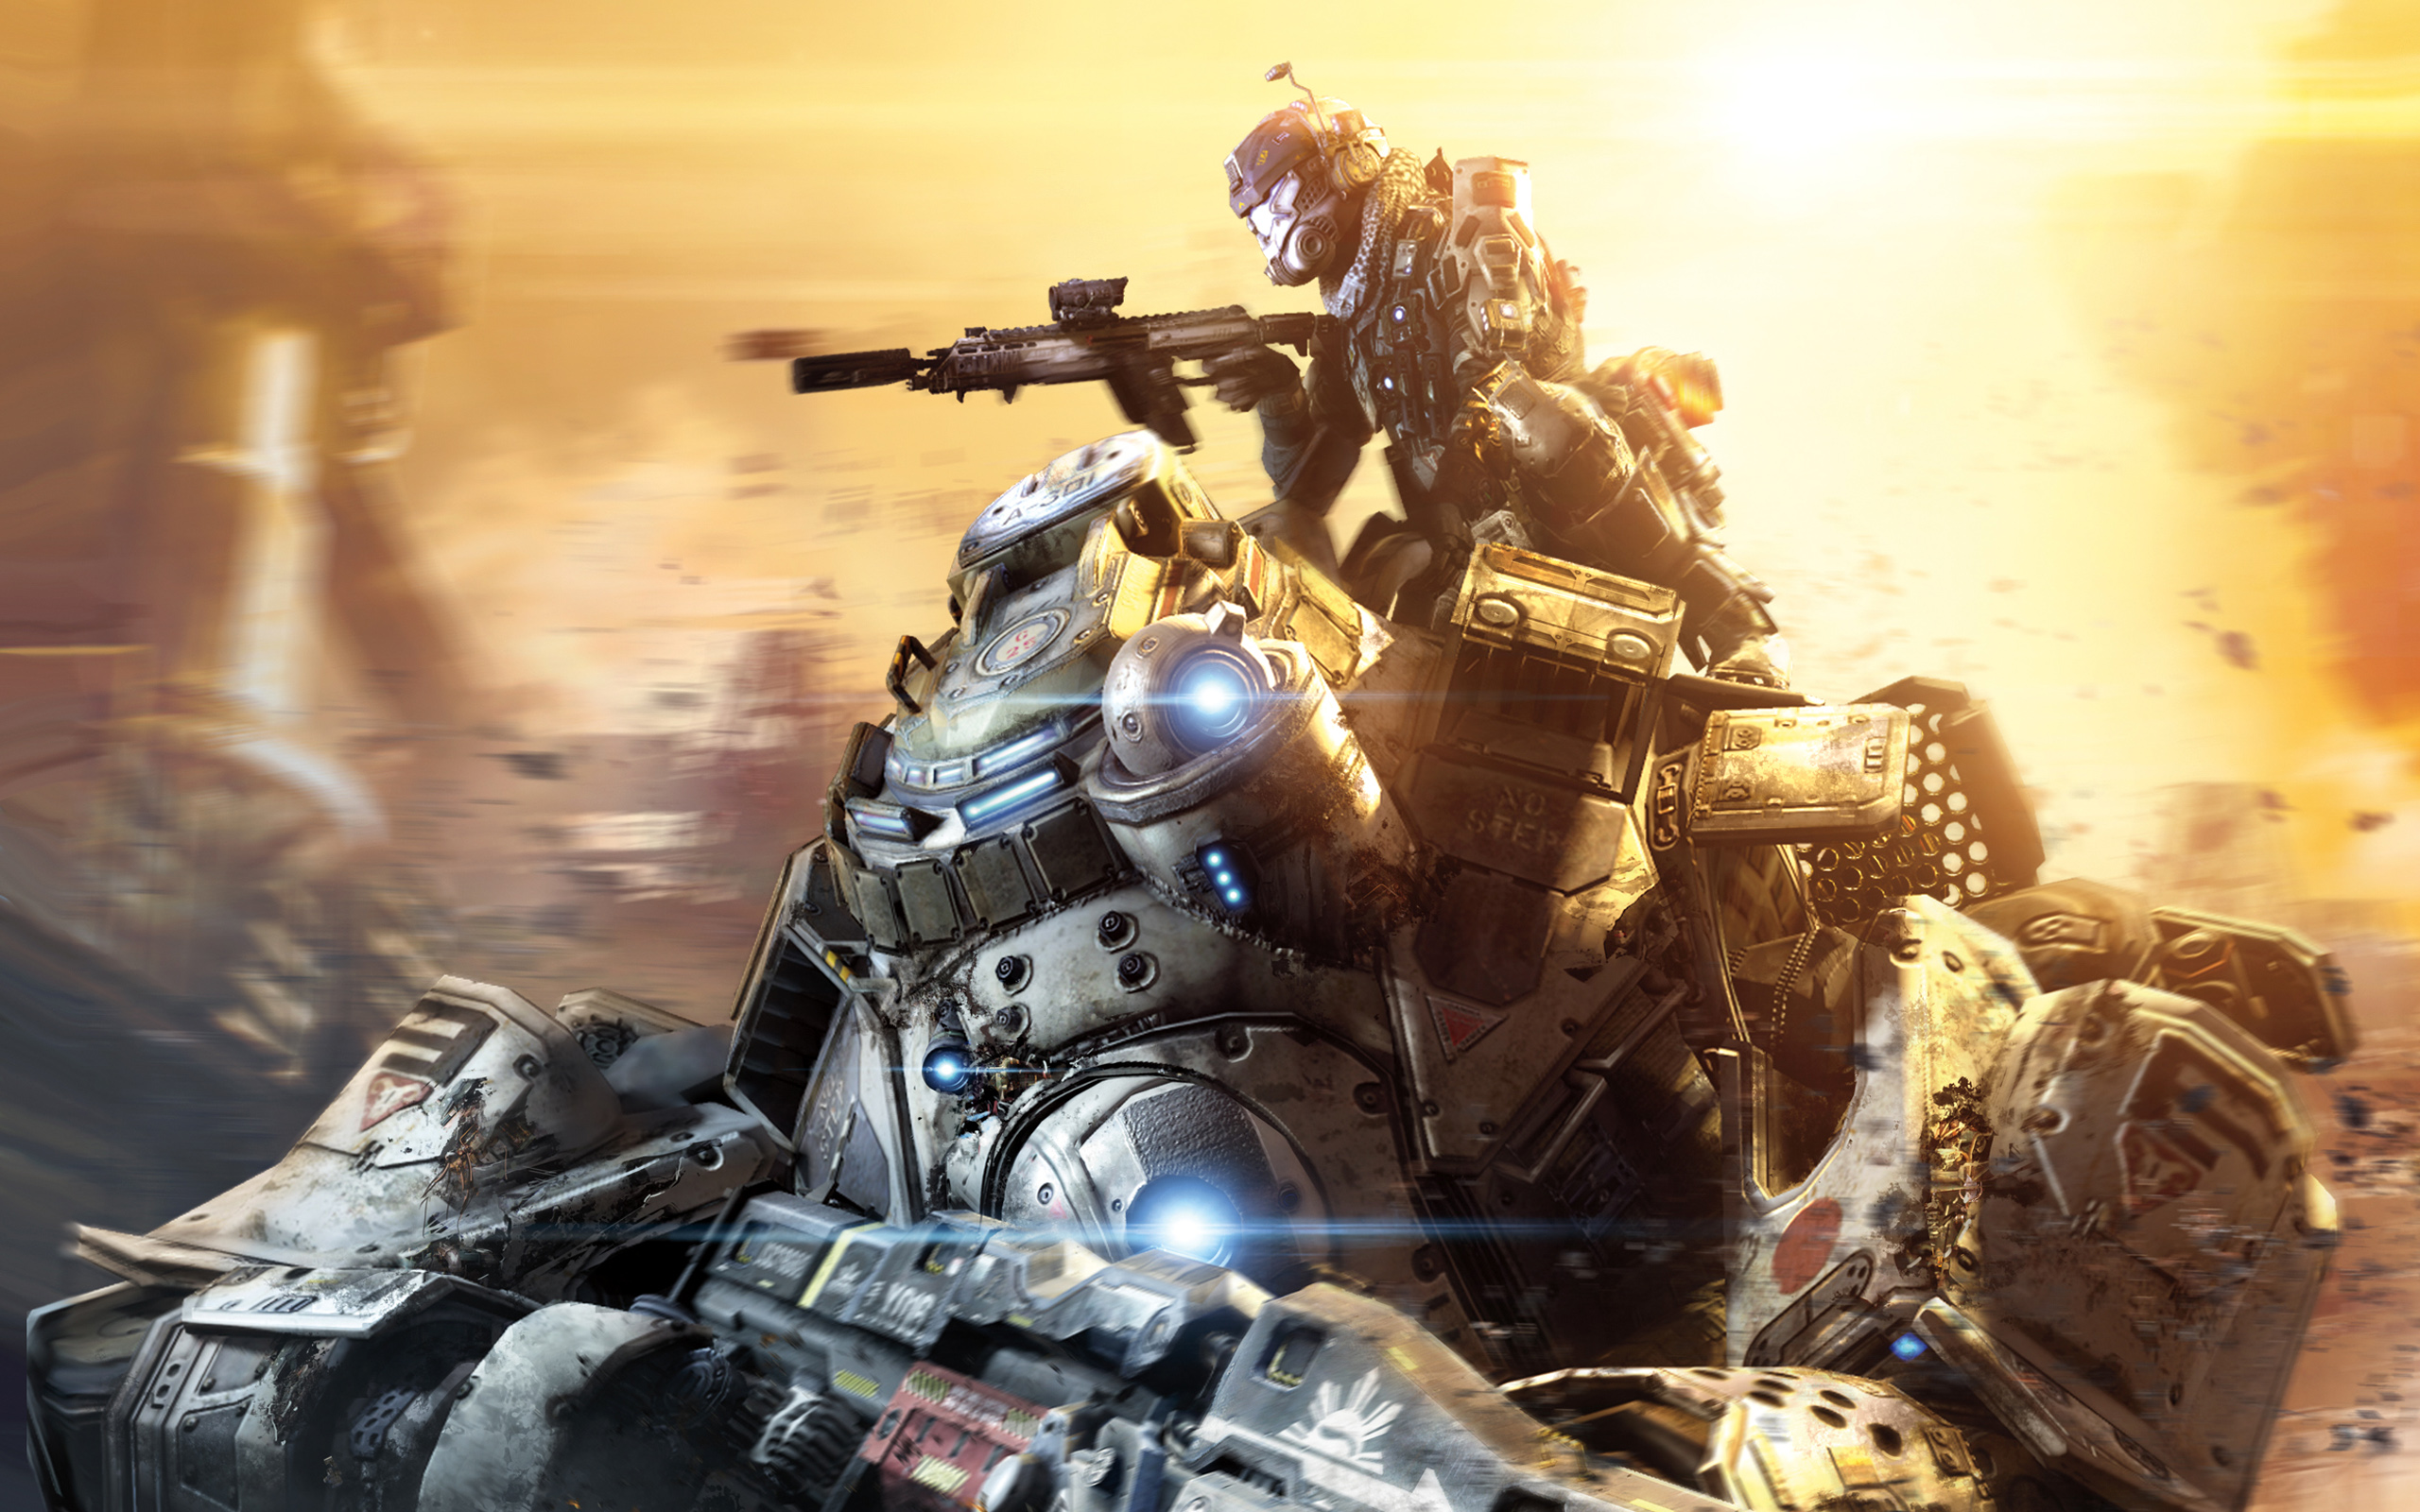 1080x1920  1080x1920 titanfall 2 games 2017 games hd for Iphone 6 7 8  wallpaper  Coolwallpapersme